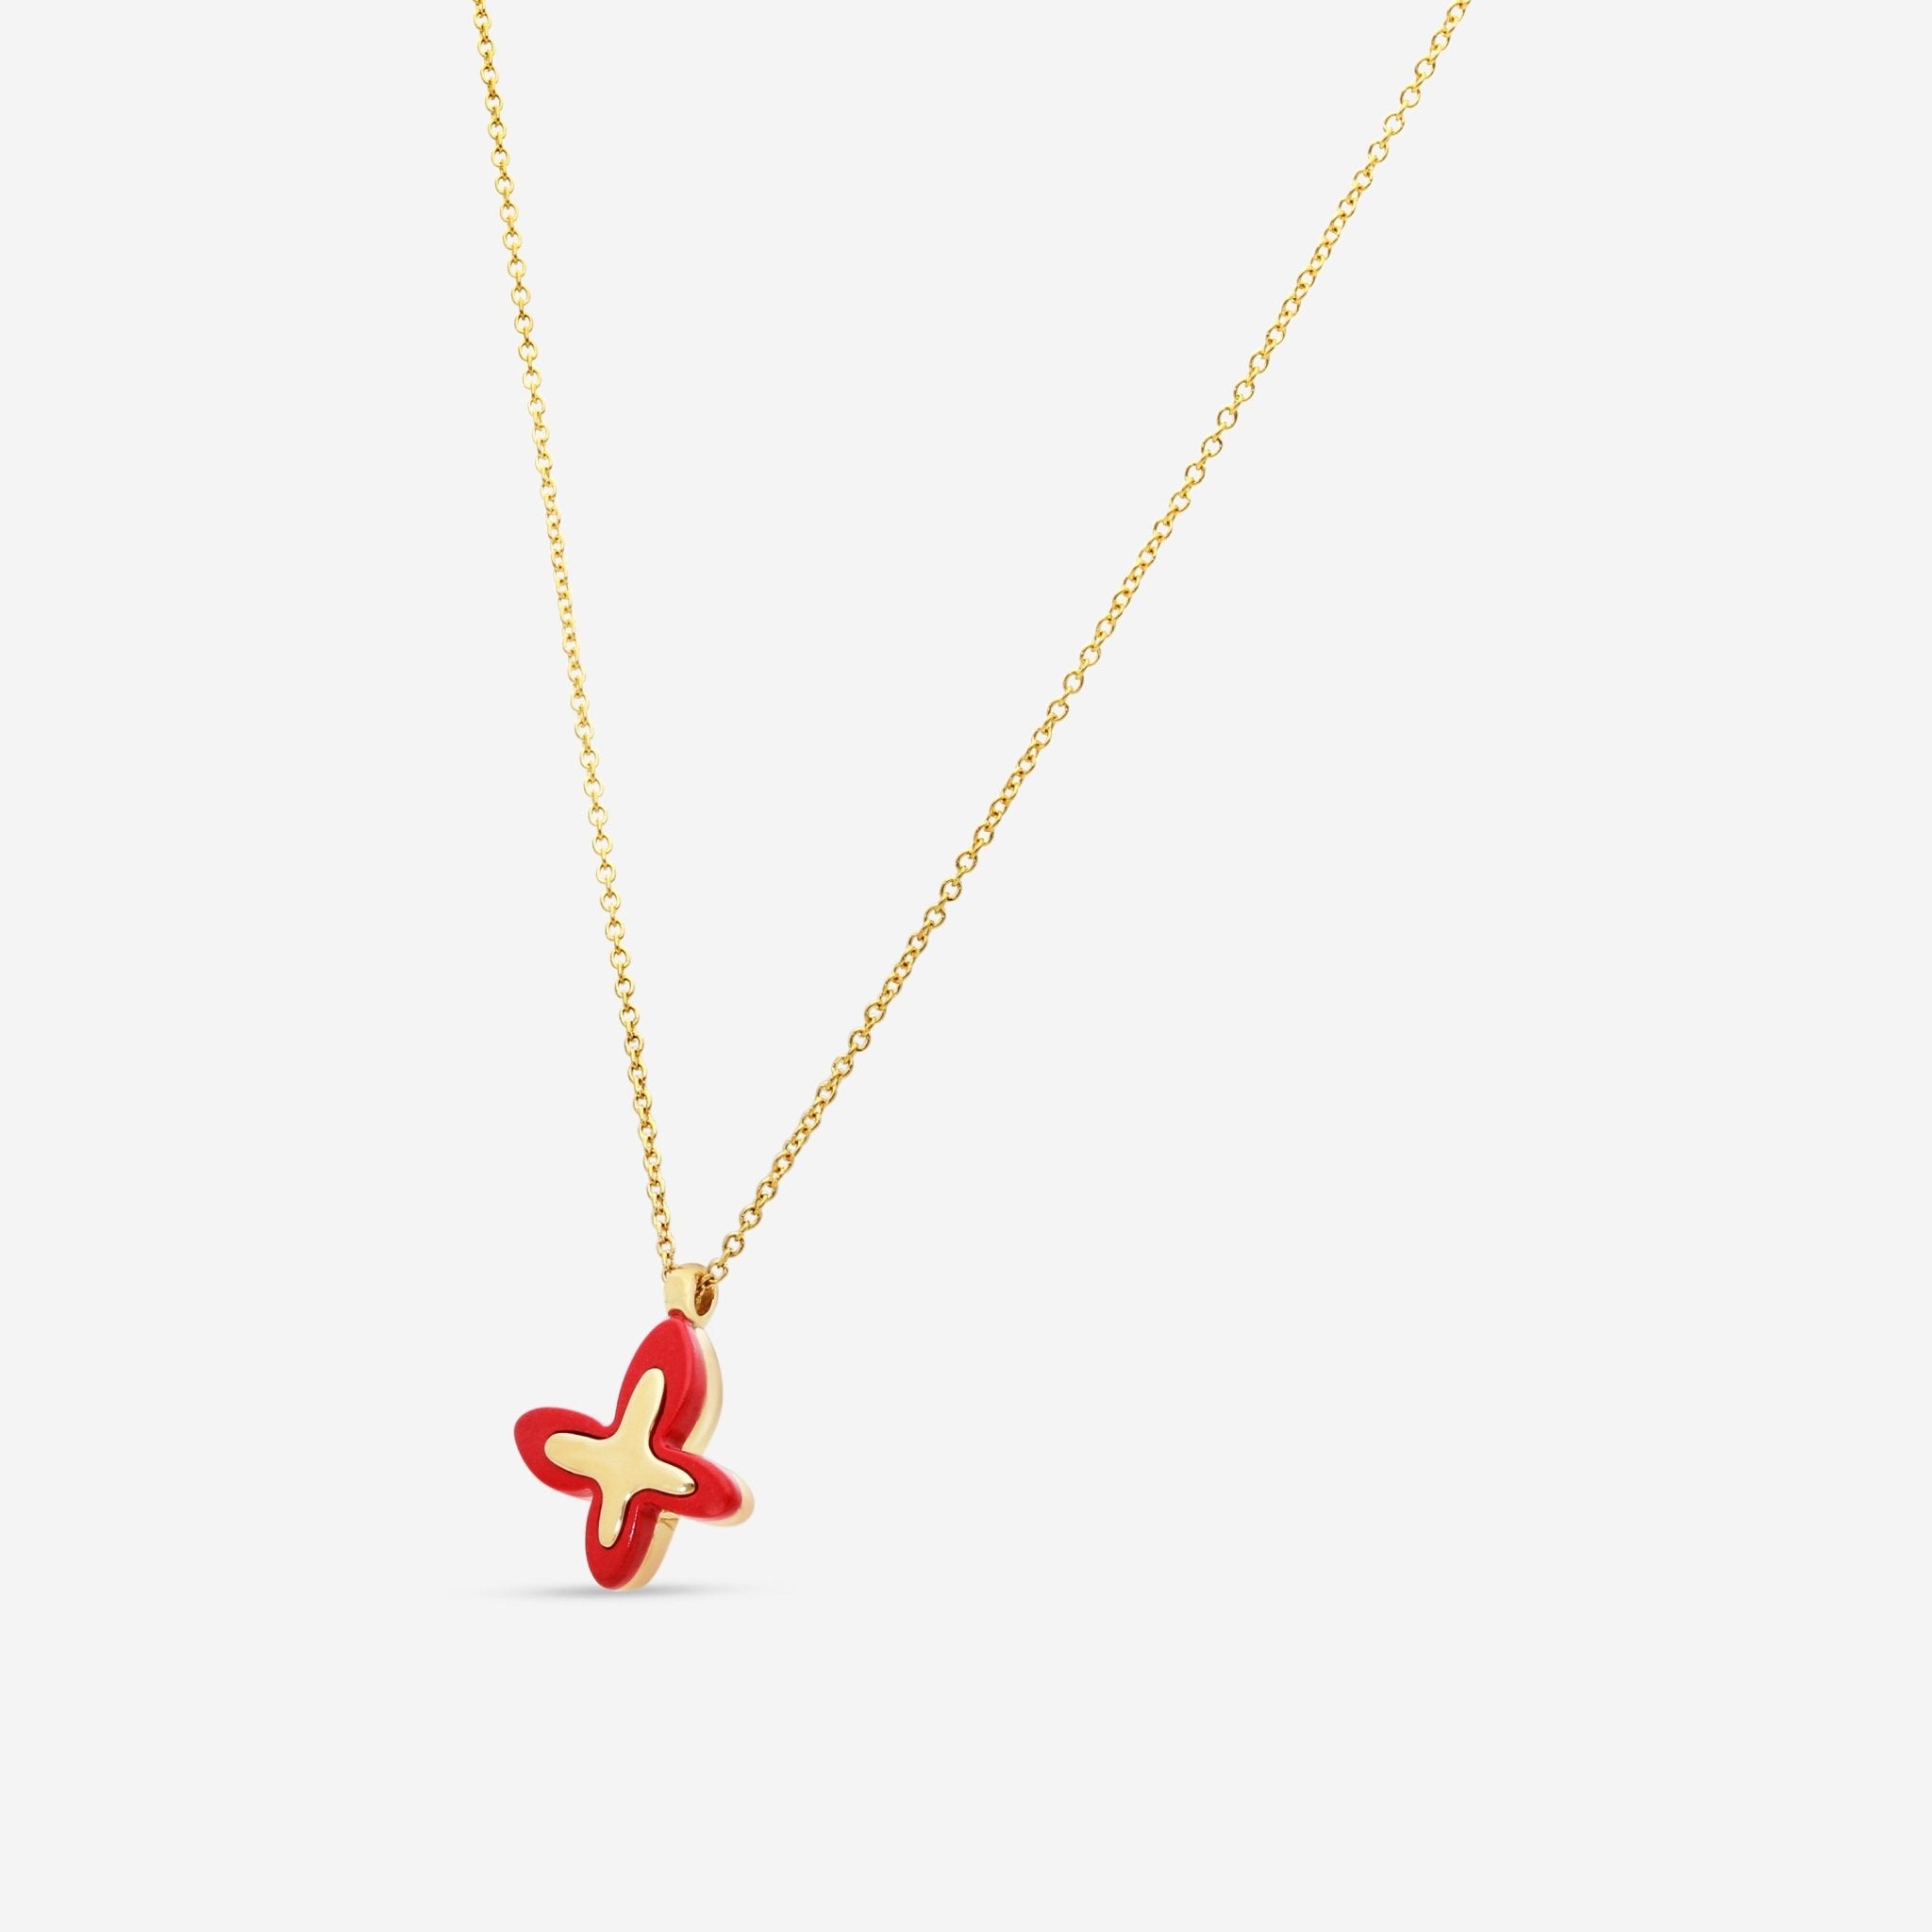 Mimi Milano Freevola 18K Yellow Gold, Red Coral Butterfly Pendant PXM243G8P8 - THE SOLIST - Mimi Milano